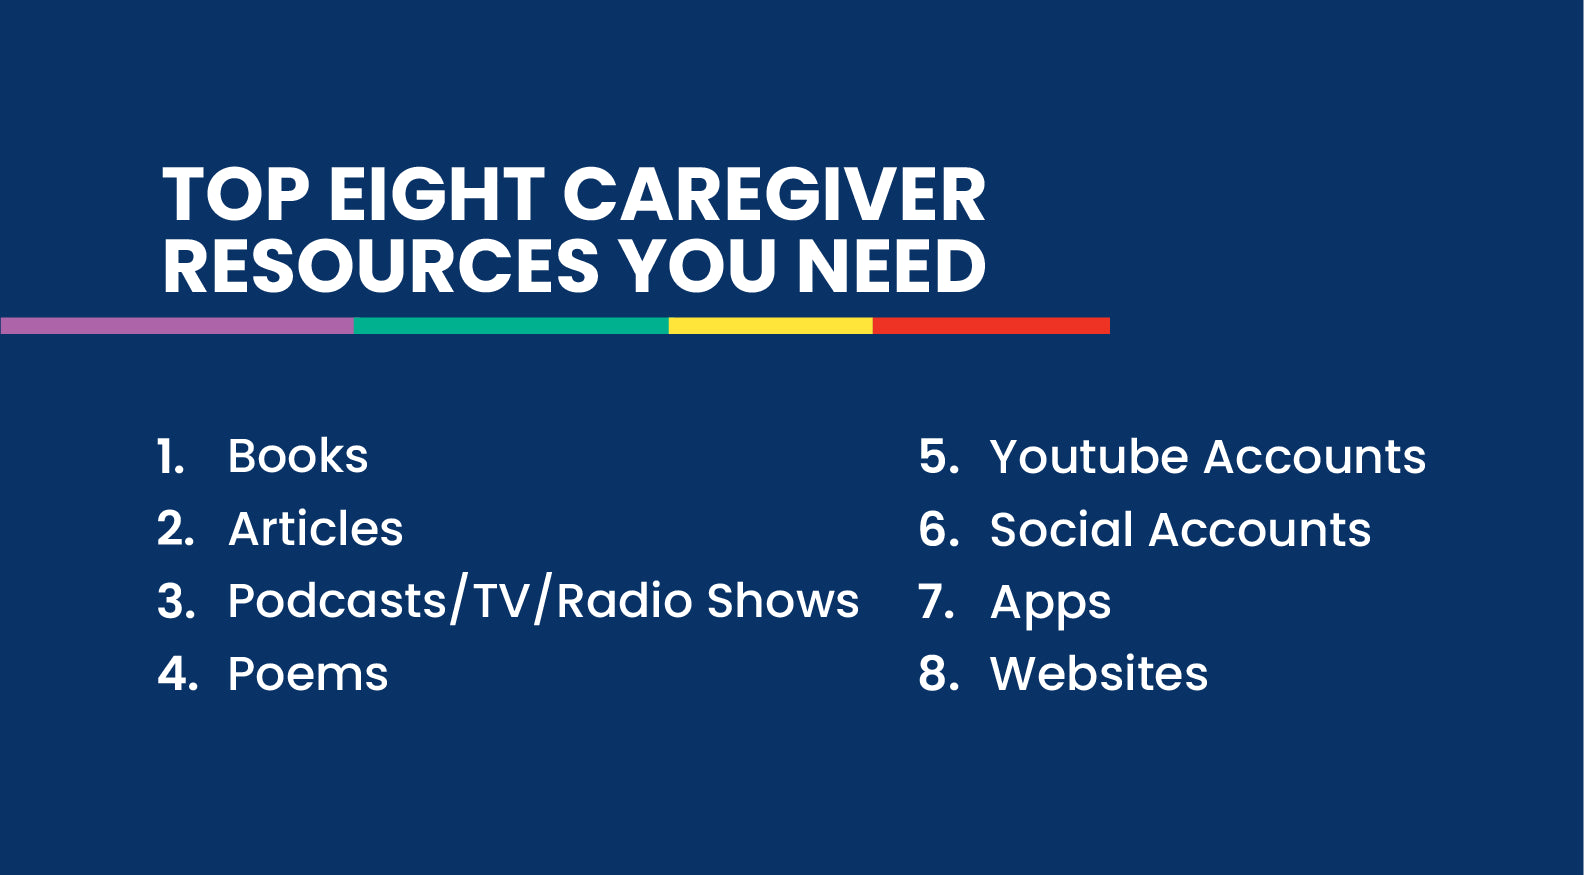 The Top Eight Caregiver Resources You Need